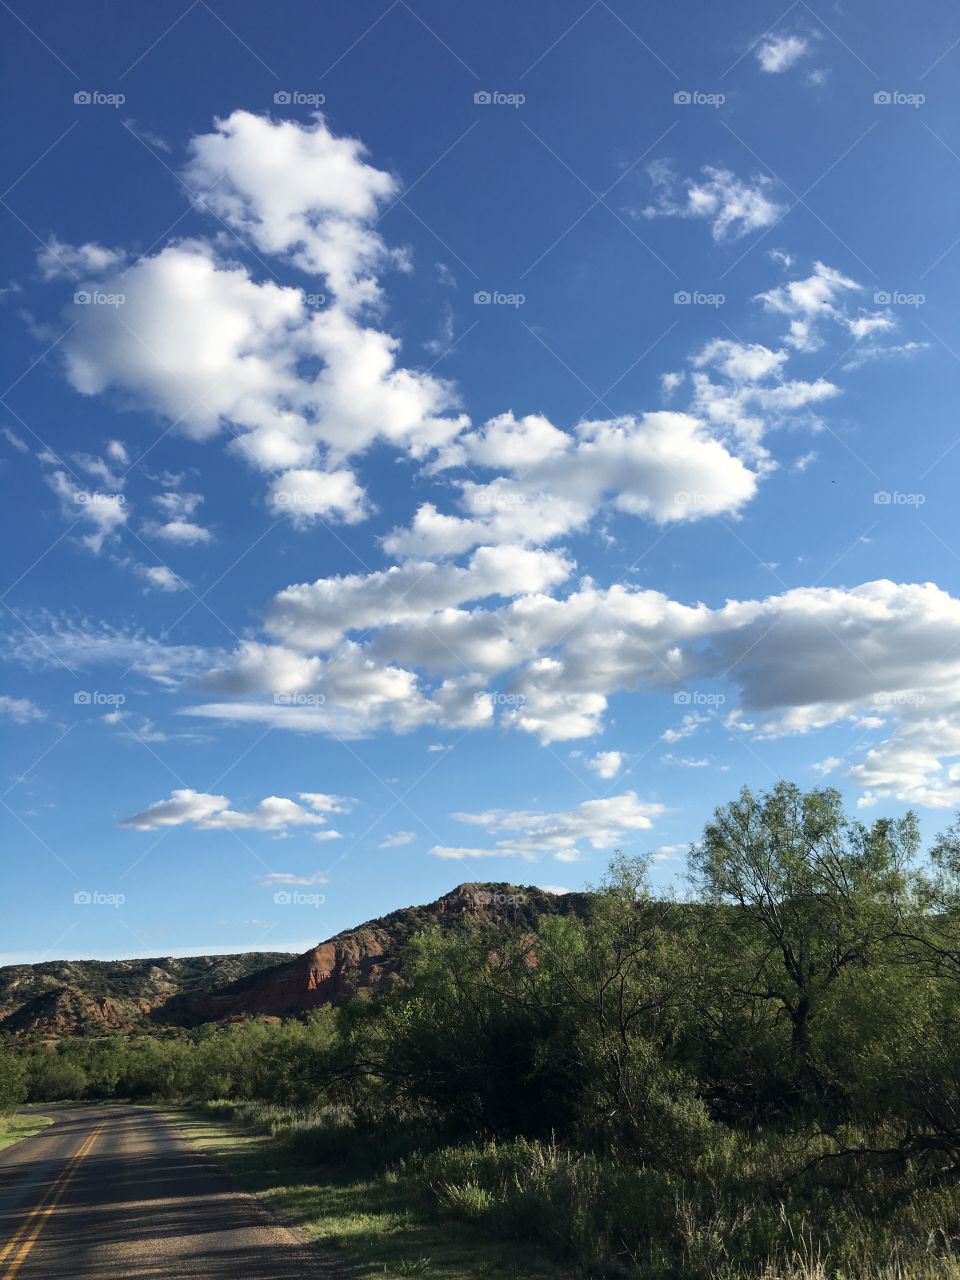 “The passage of time” these clouds contrast to the blue sky behind them symbolize the stark beauty of life while reminding us all how fleeting it really is. Taken in Palo Duro canyon 